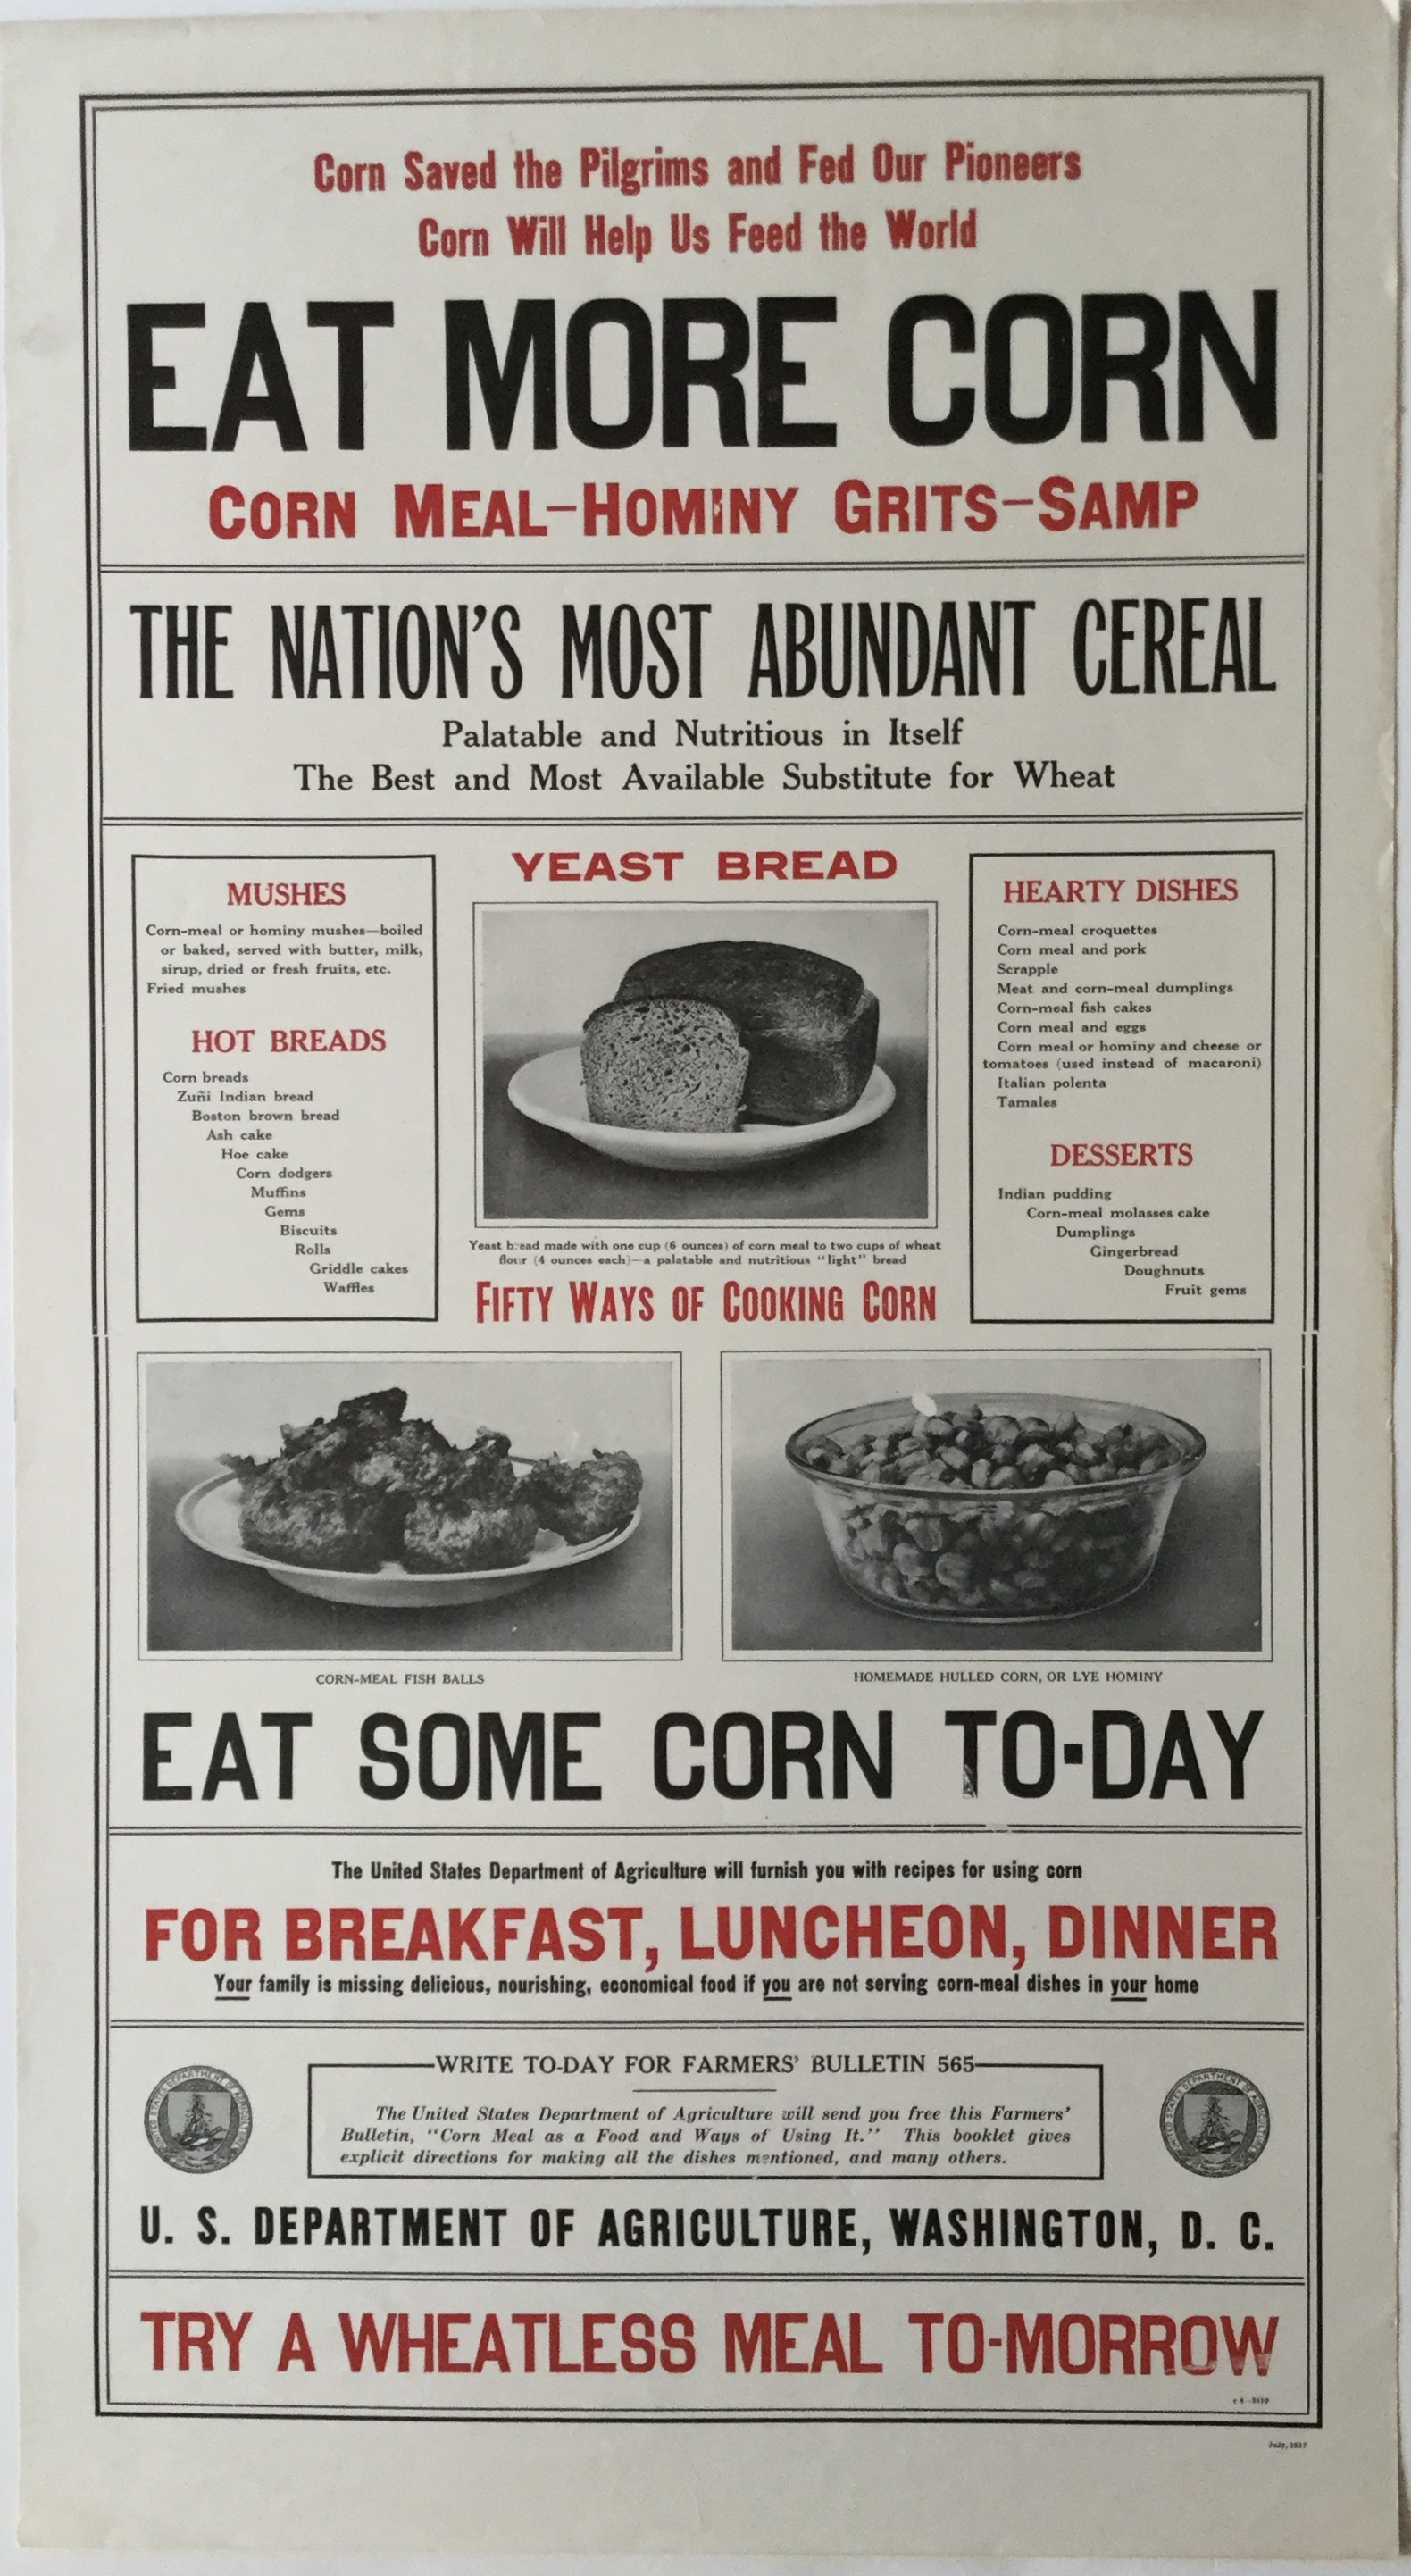 B1824 EAT MORE CORN - CORNMEAL HOMINY GRITS - THE NATIONS MOST ABUNDANT CEREAL